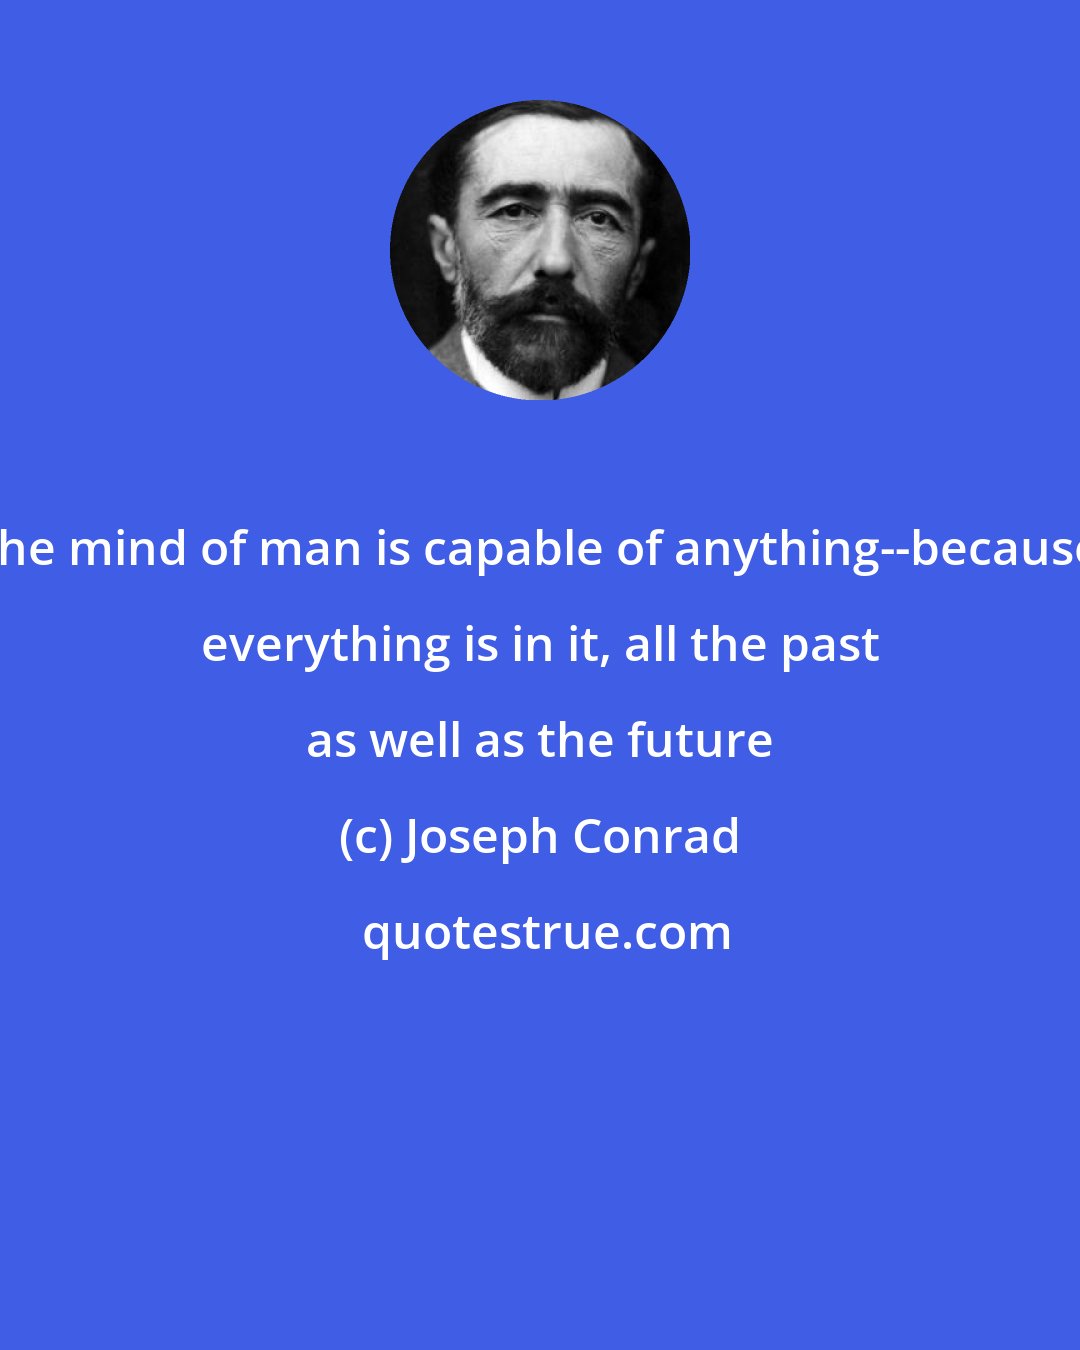 Joseph Conrad: the mind of man is capable of anything--because everything is in it, all the past as well as the future